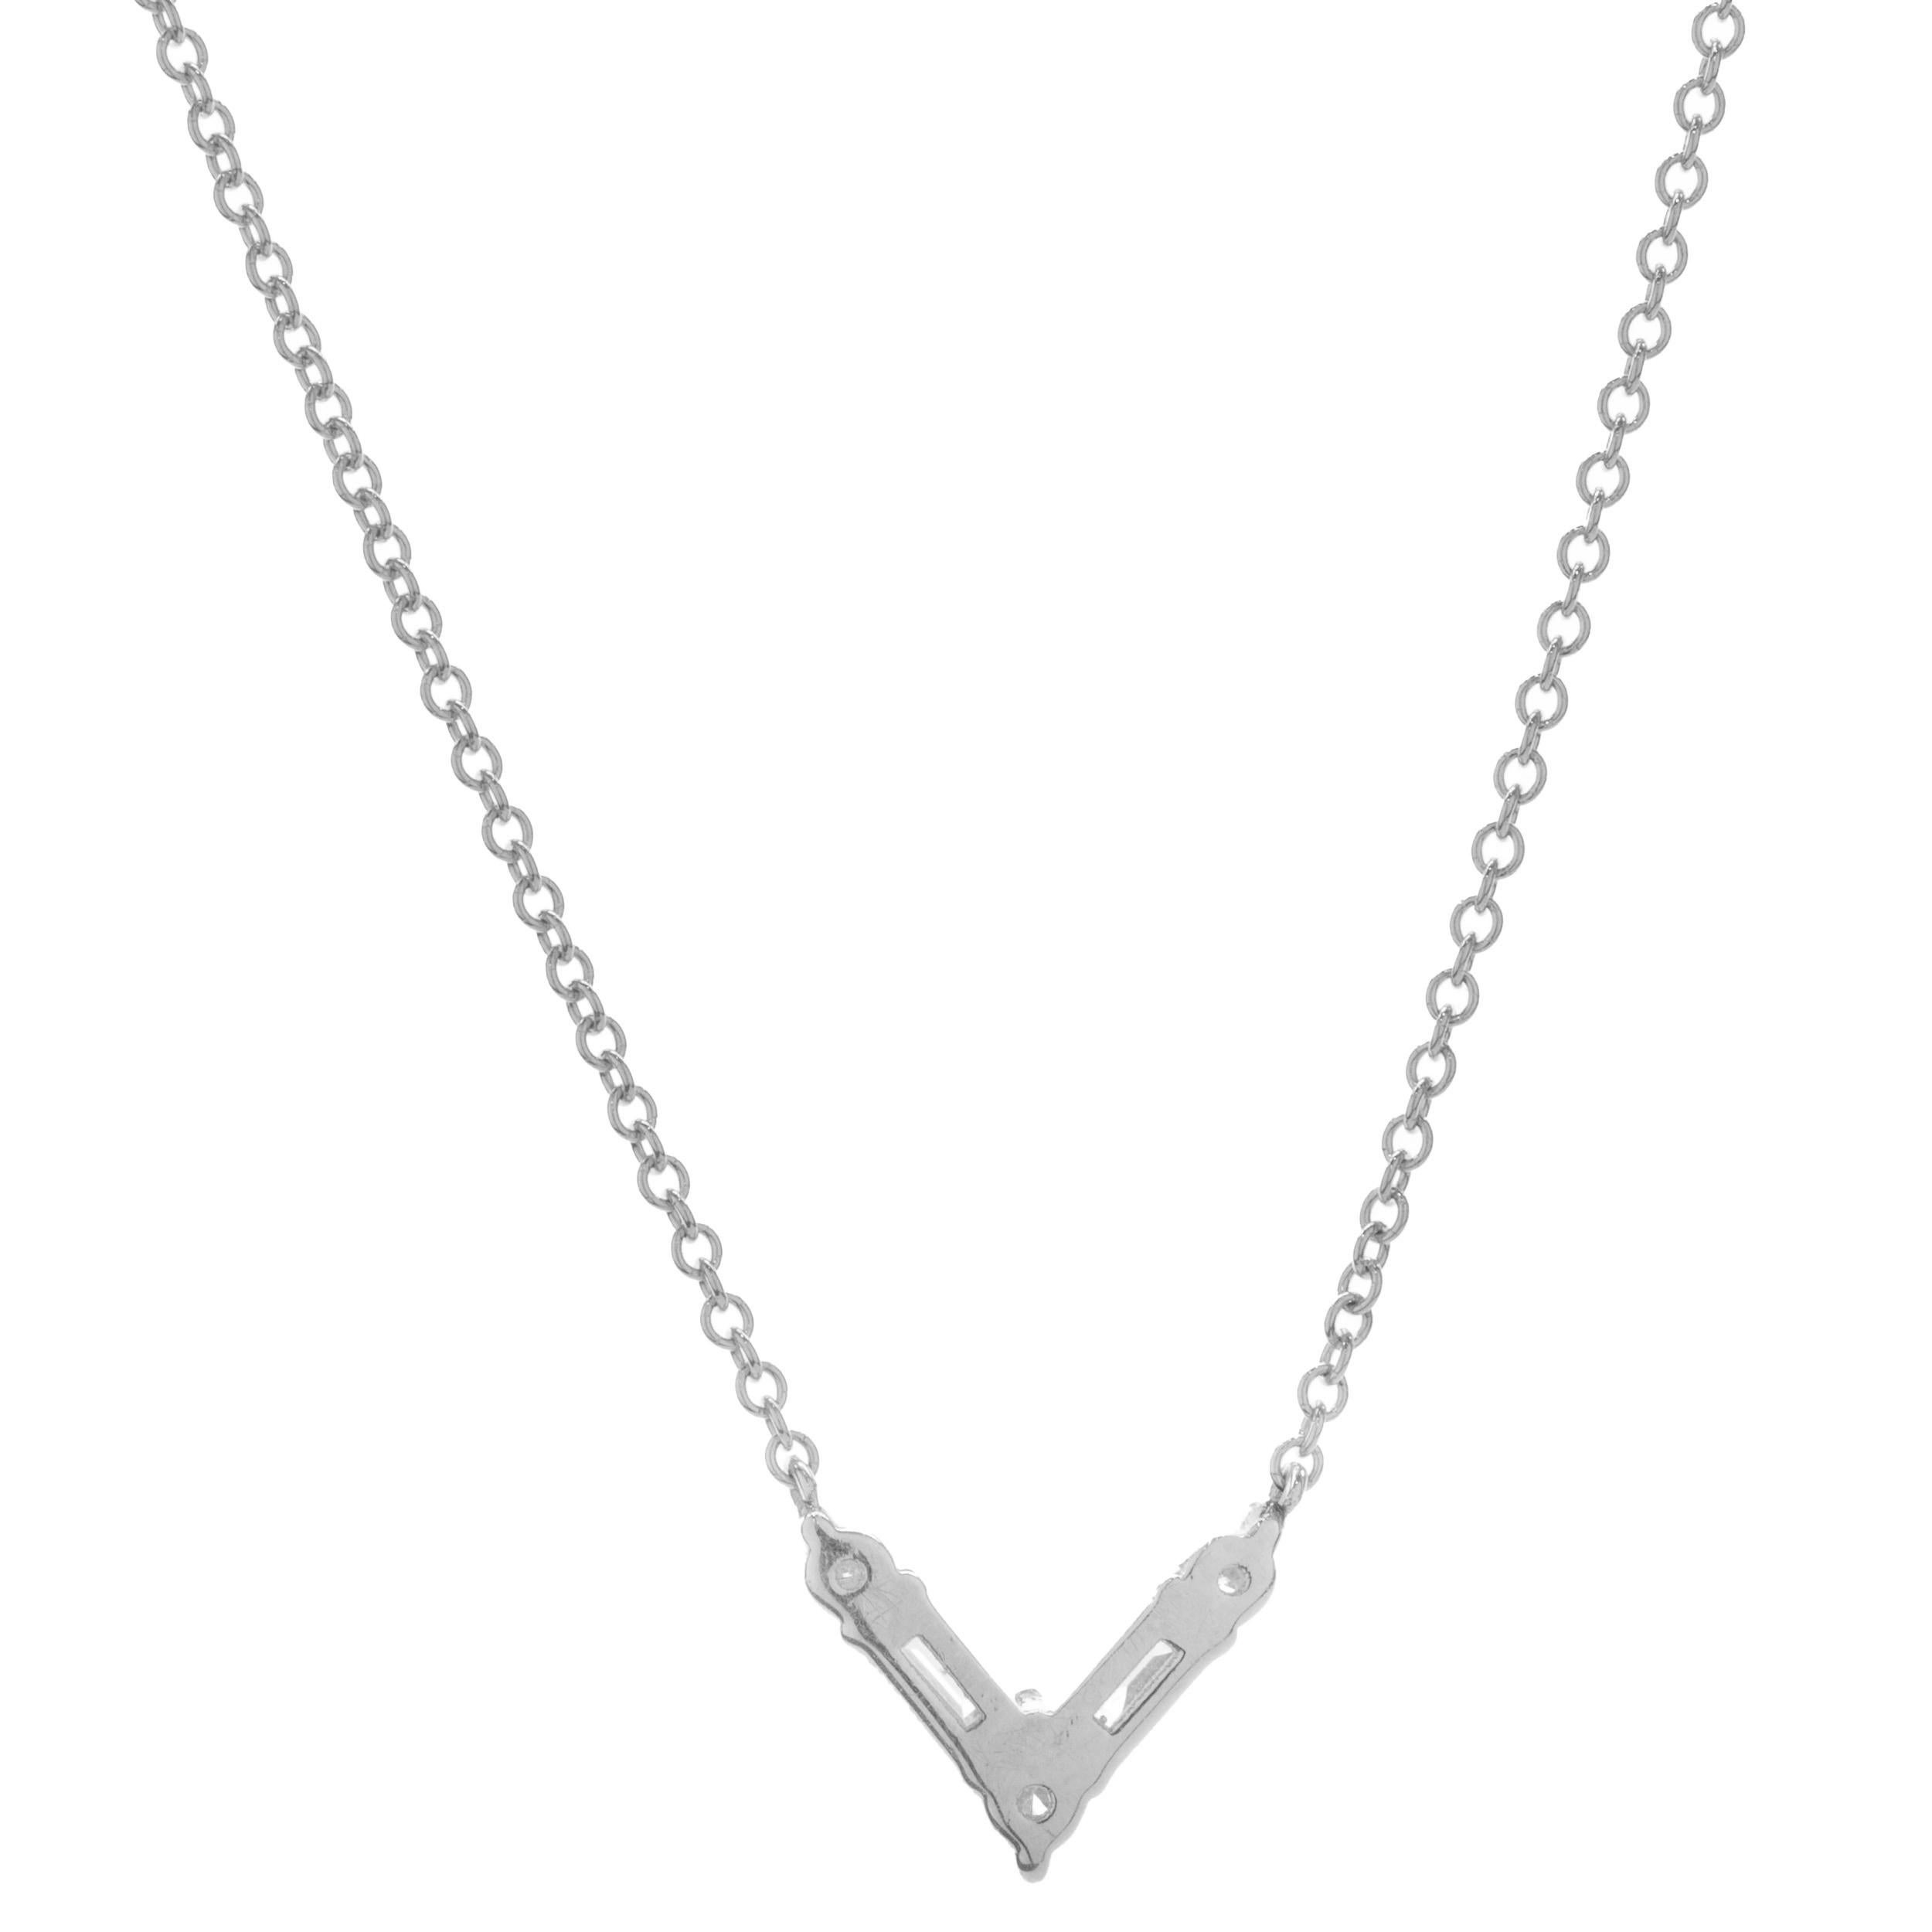 Designer: custom design
Material: 14K white gold
Diamond: 5 round and baguette cut = 0.17cttw
Color: G
Clarity: SI1
Dimensions: necklace measures 18-inches in length 
Weight: 1.75 grams